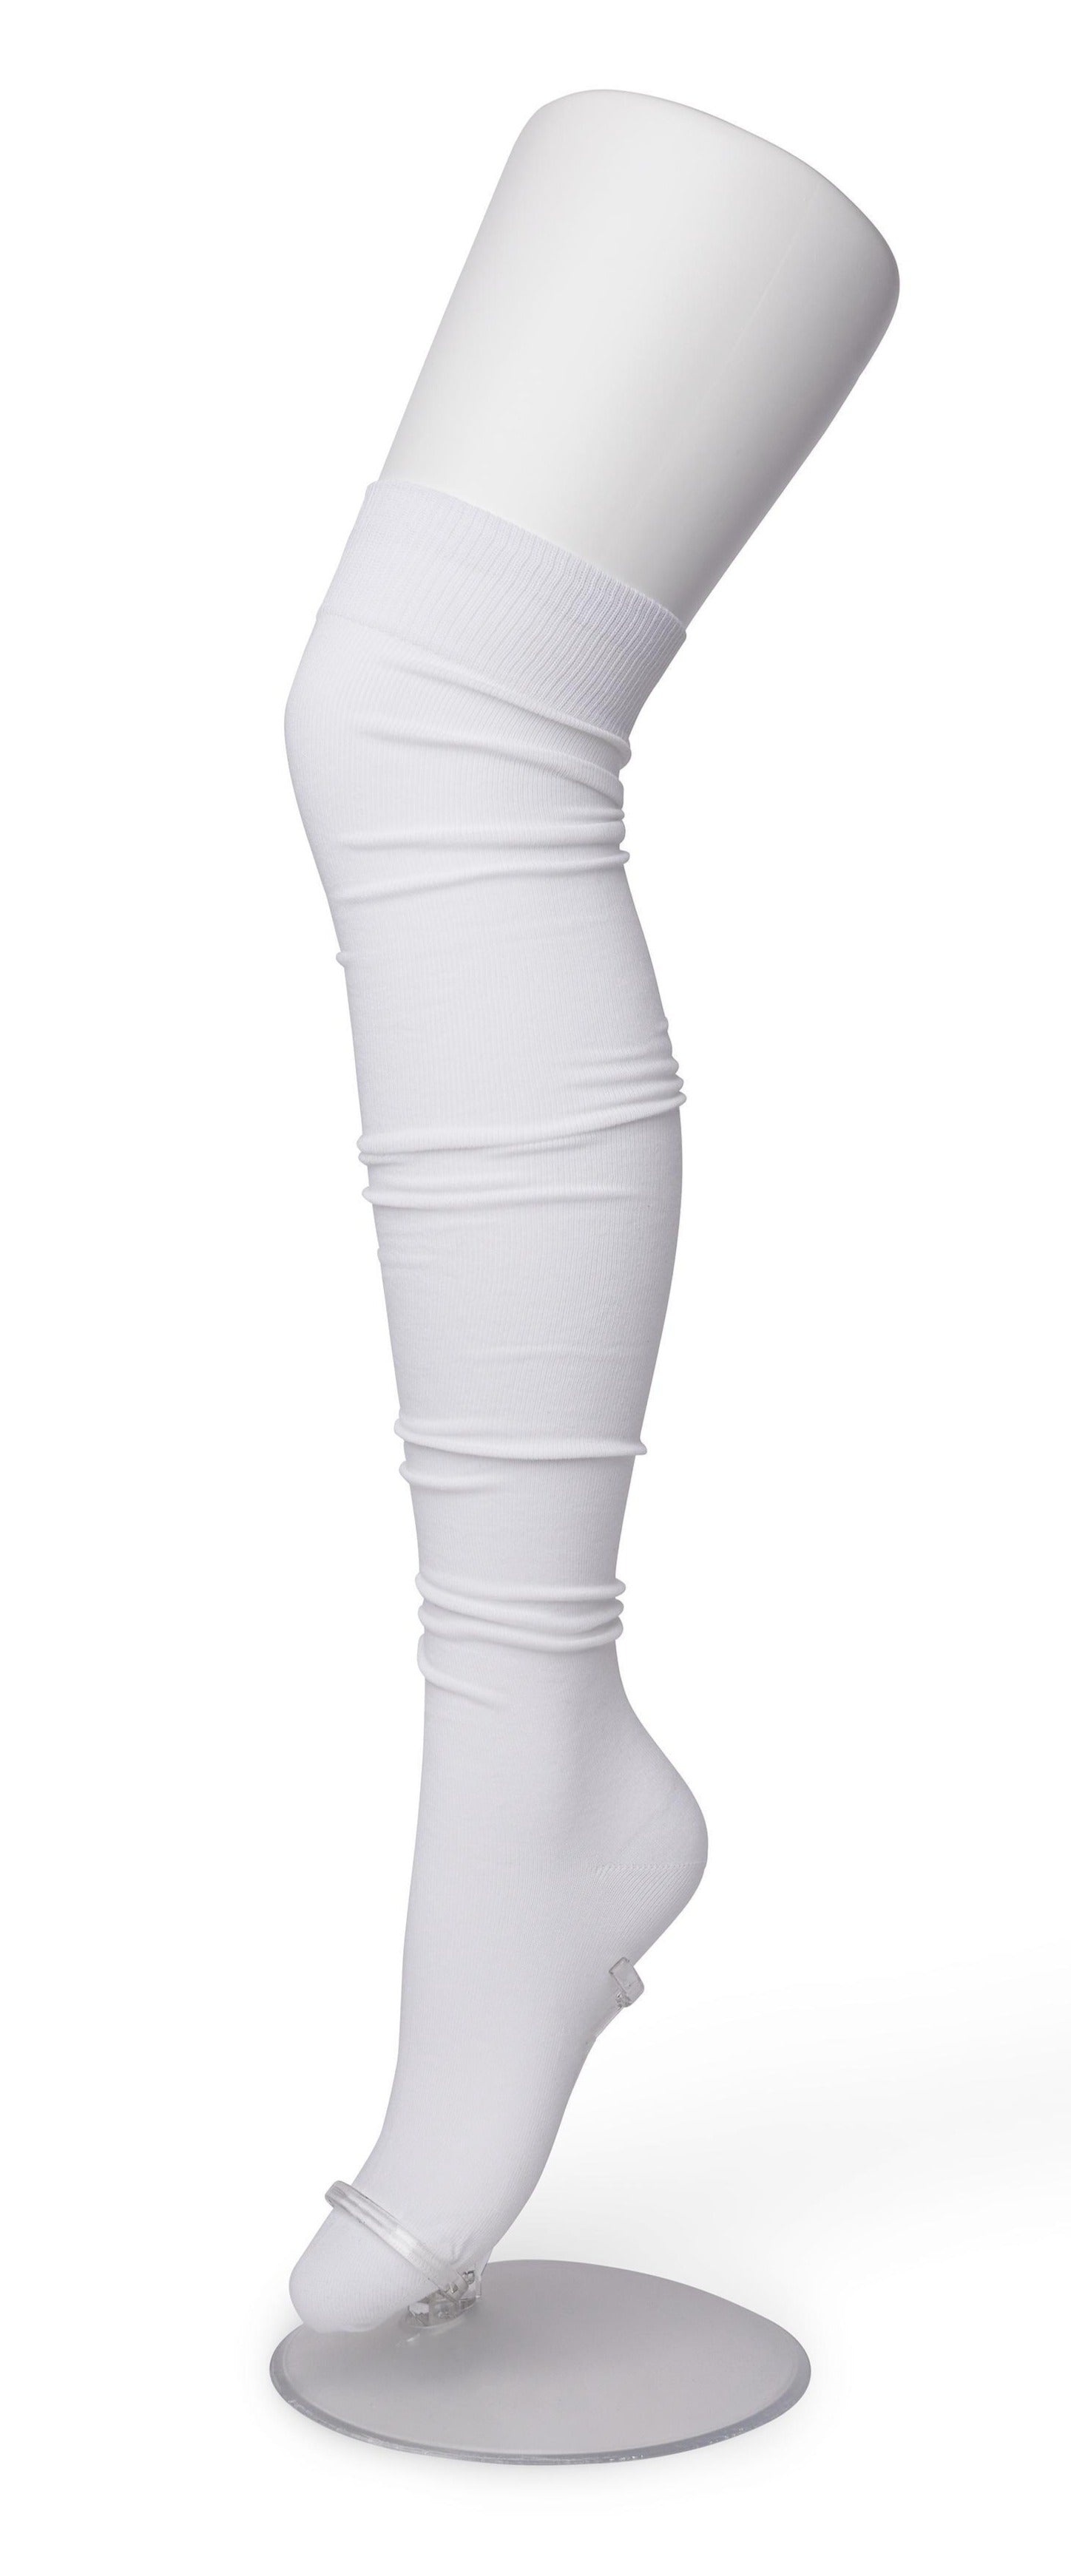 Bonnie Doon Cotton Over The Knee Sock P53496 - white cotton thigh high socks